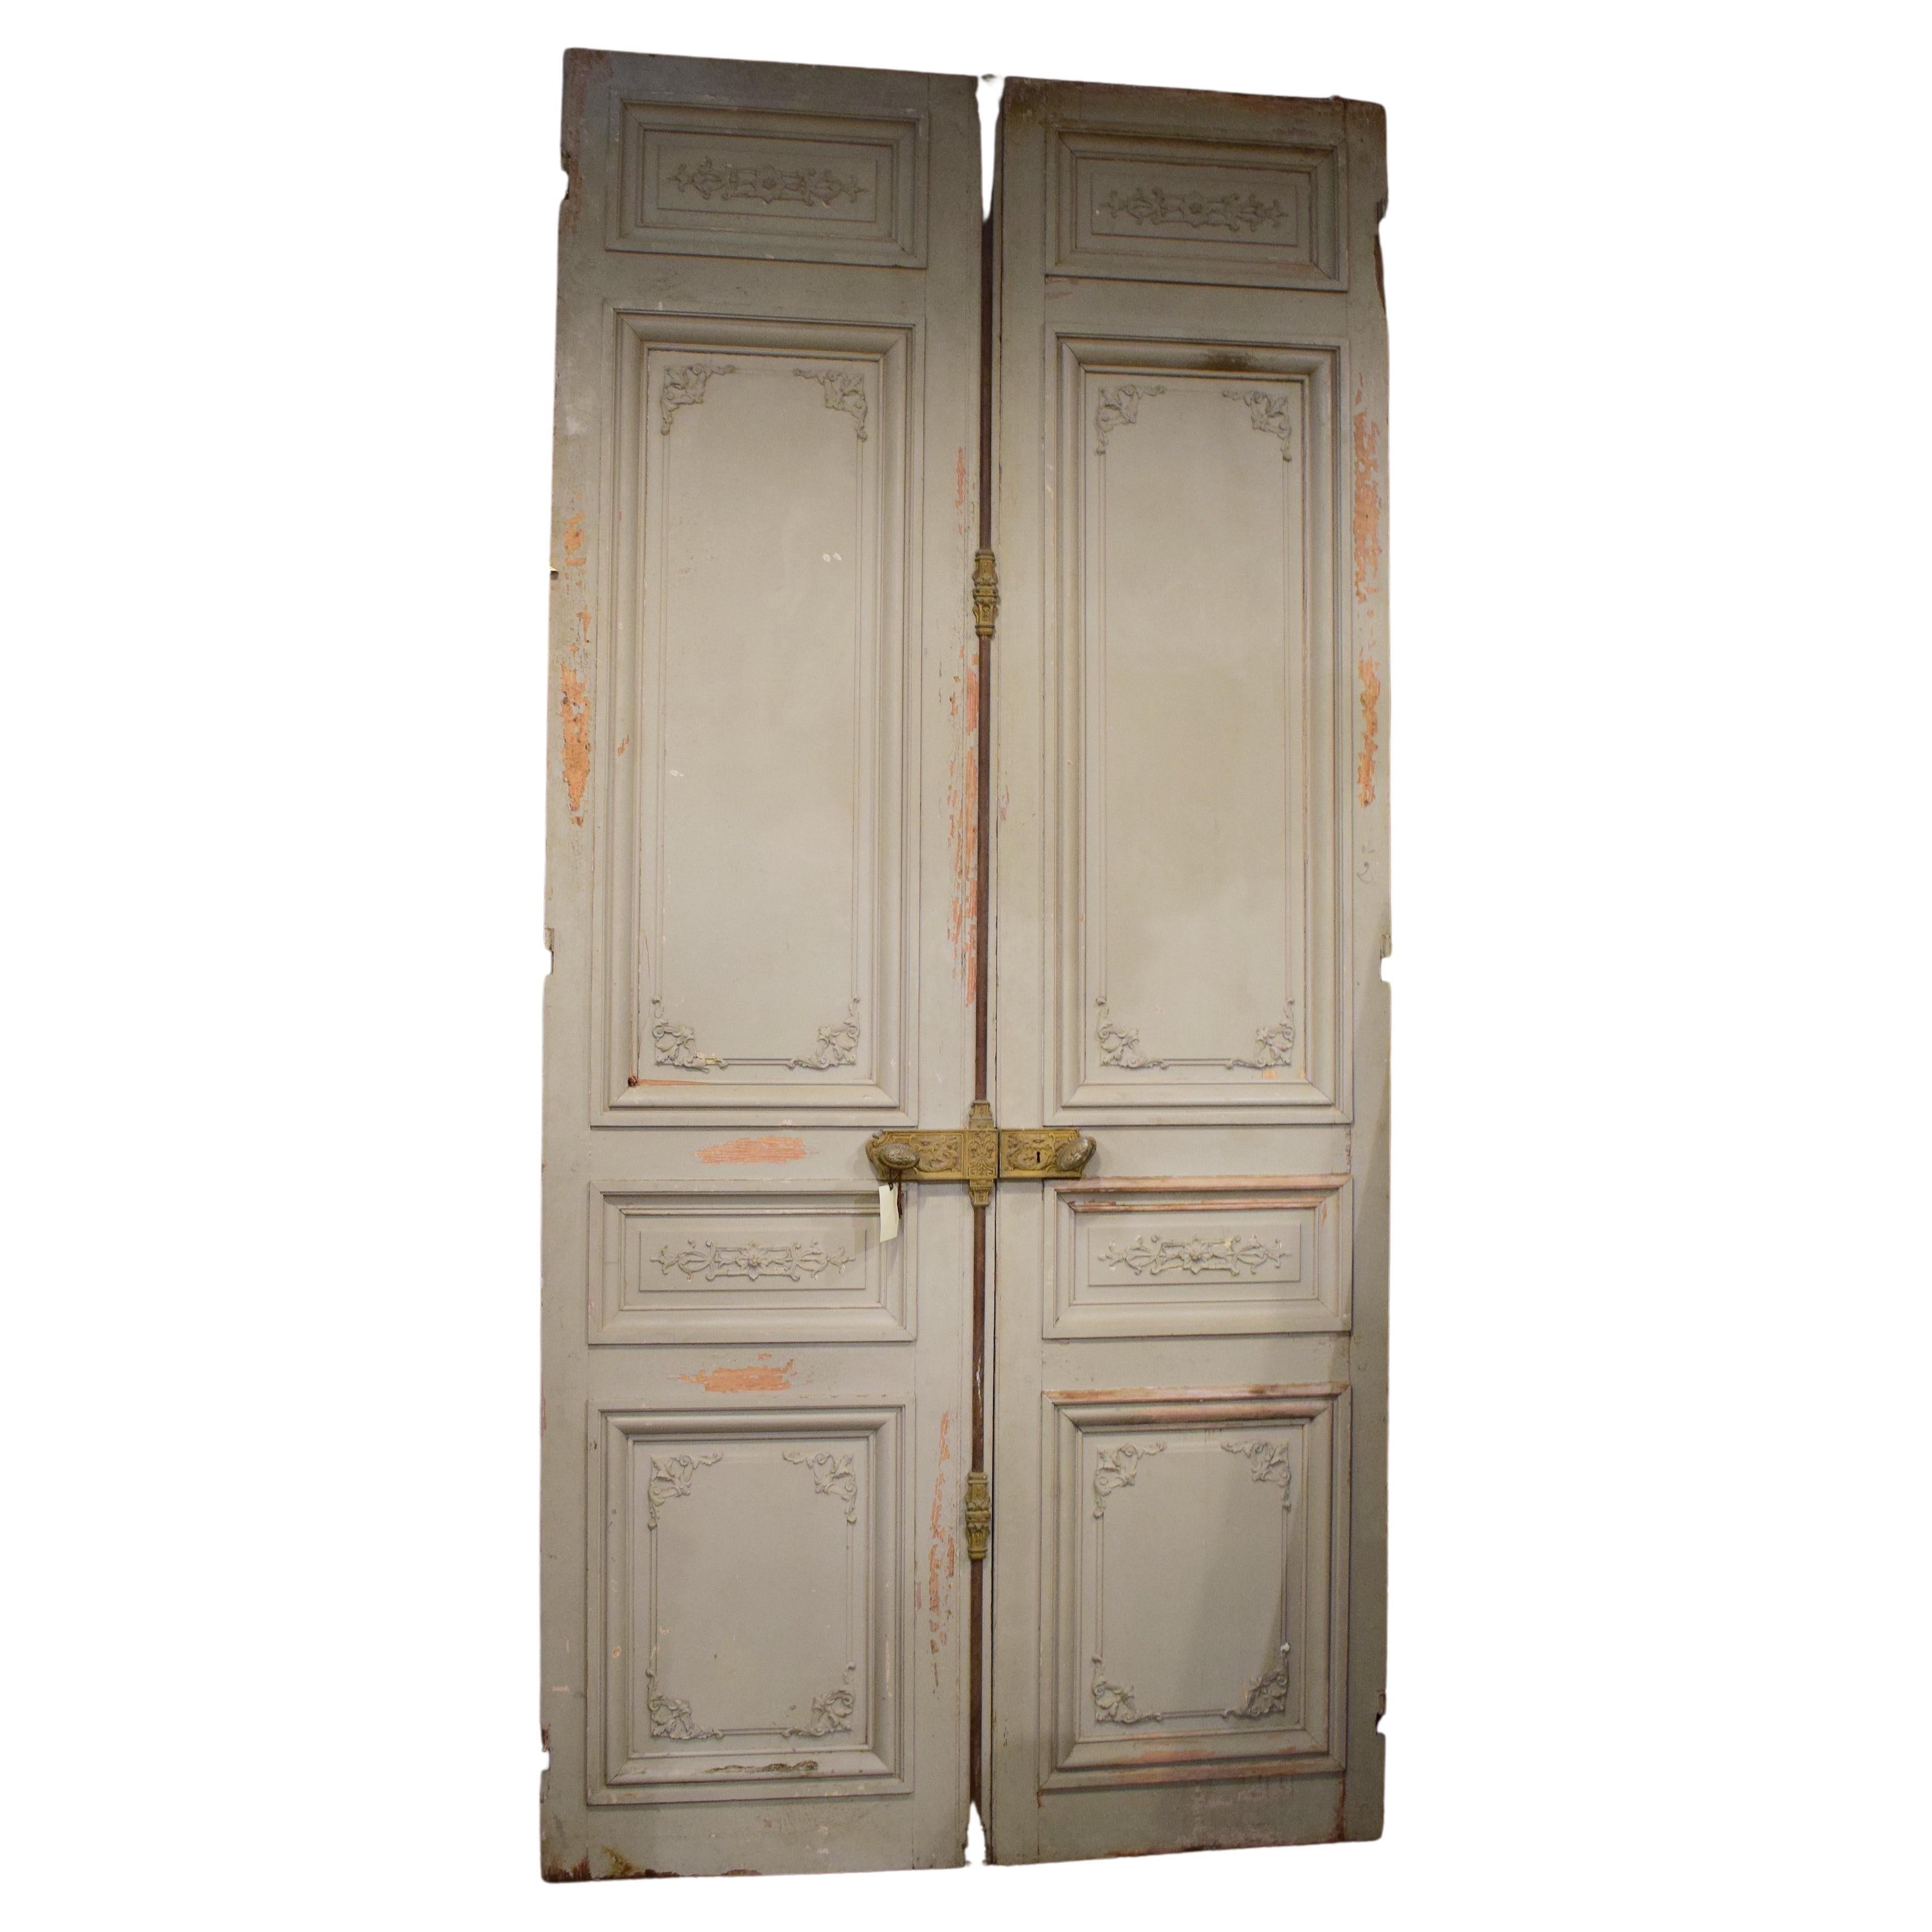 Large Set of Napoleon III French Antique Exterior Doors with Carved Panels